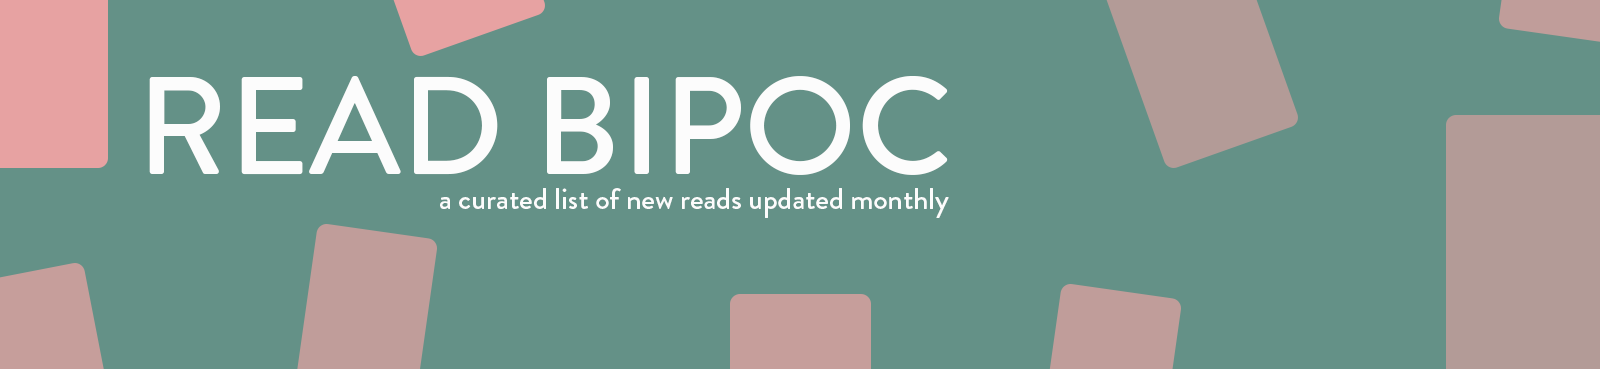 READ BIPOC - a curated list of new titles updated monthly with clickable link! 